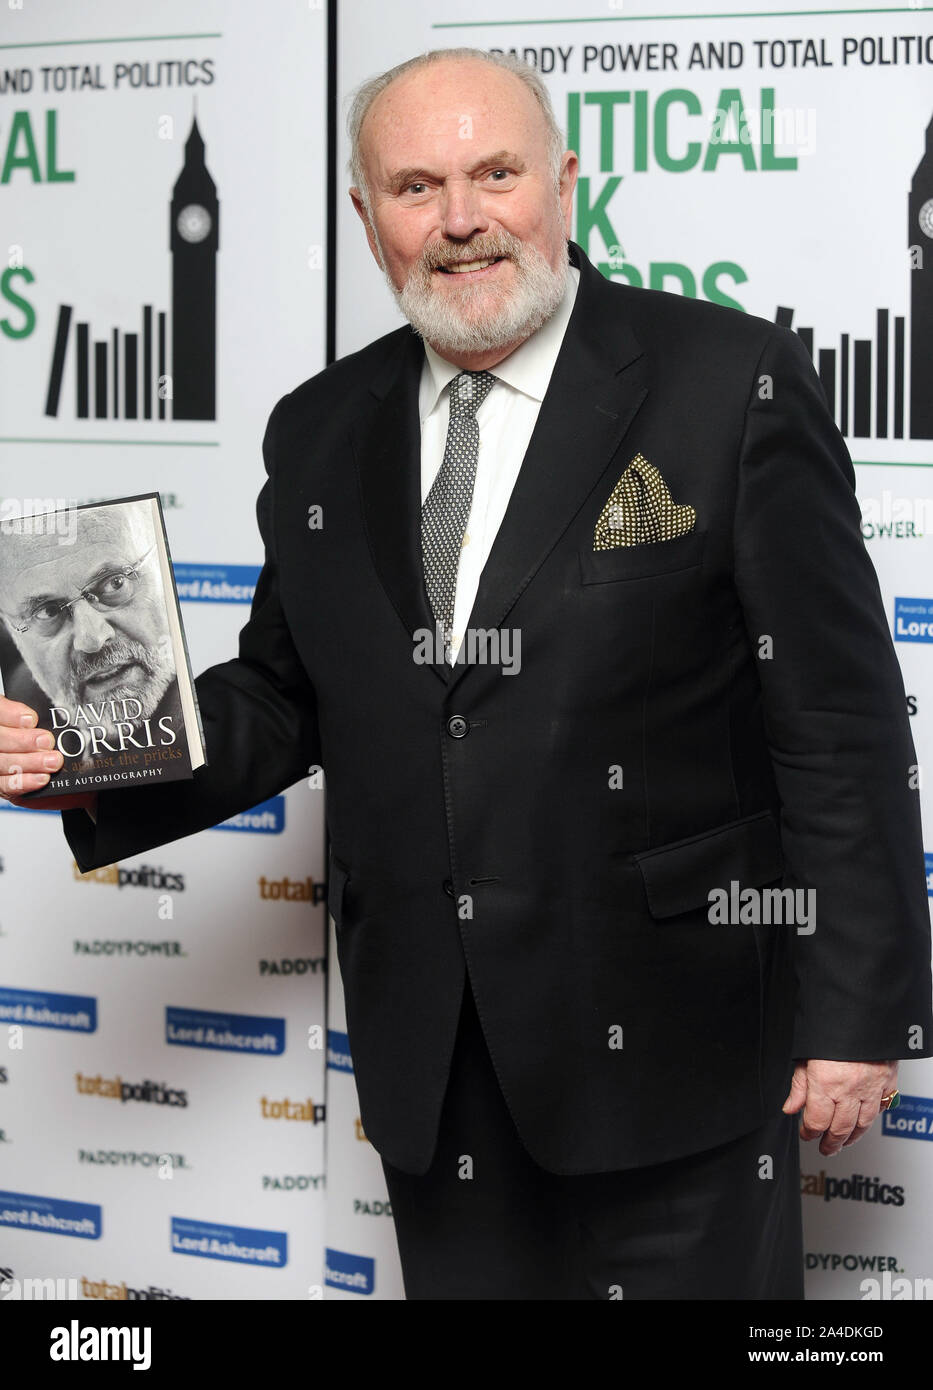 Photo Must Be Credited ©Kate Green/Alpha Press 076866 06/02/2013 David Norris at The Political Book Awards 2013 held at the BFI Imax in London Stock Photo